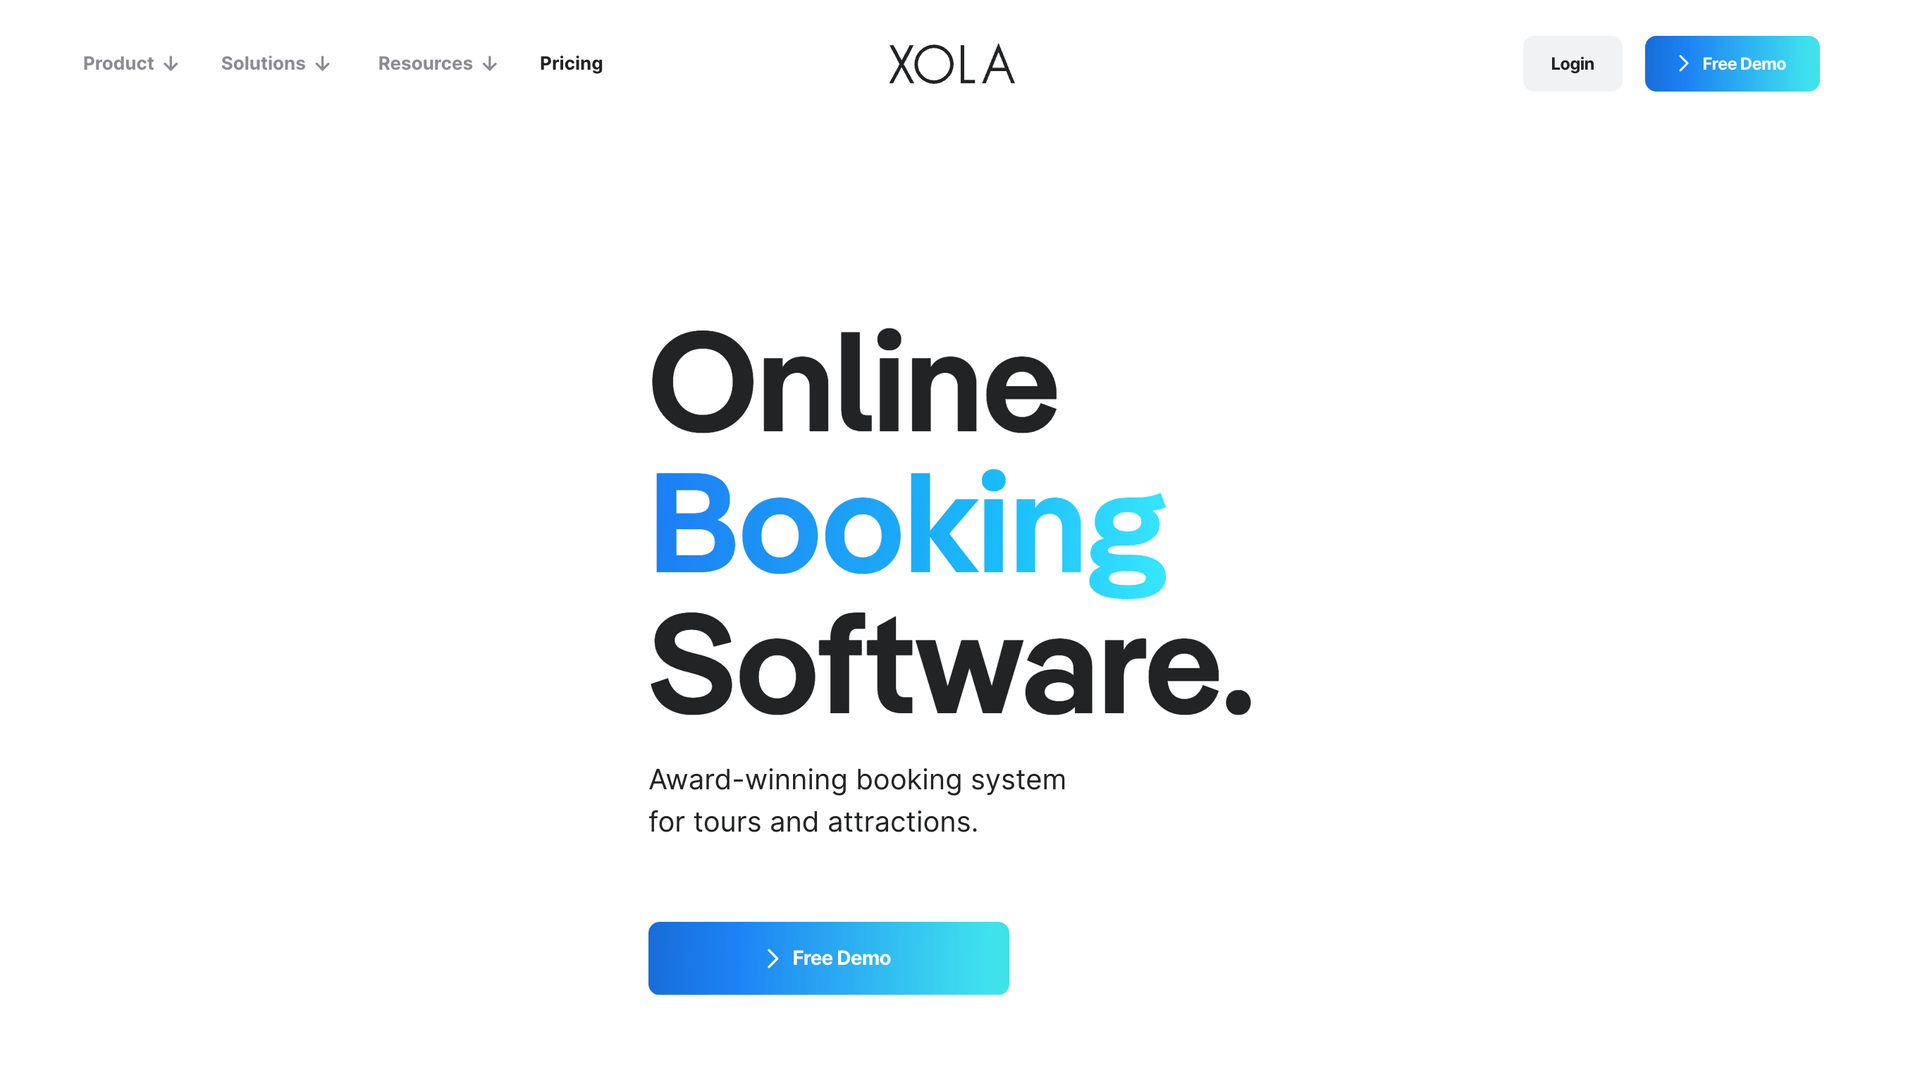 Xola homepage: Online Booking Software